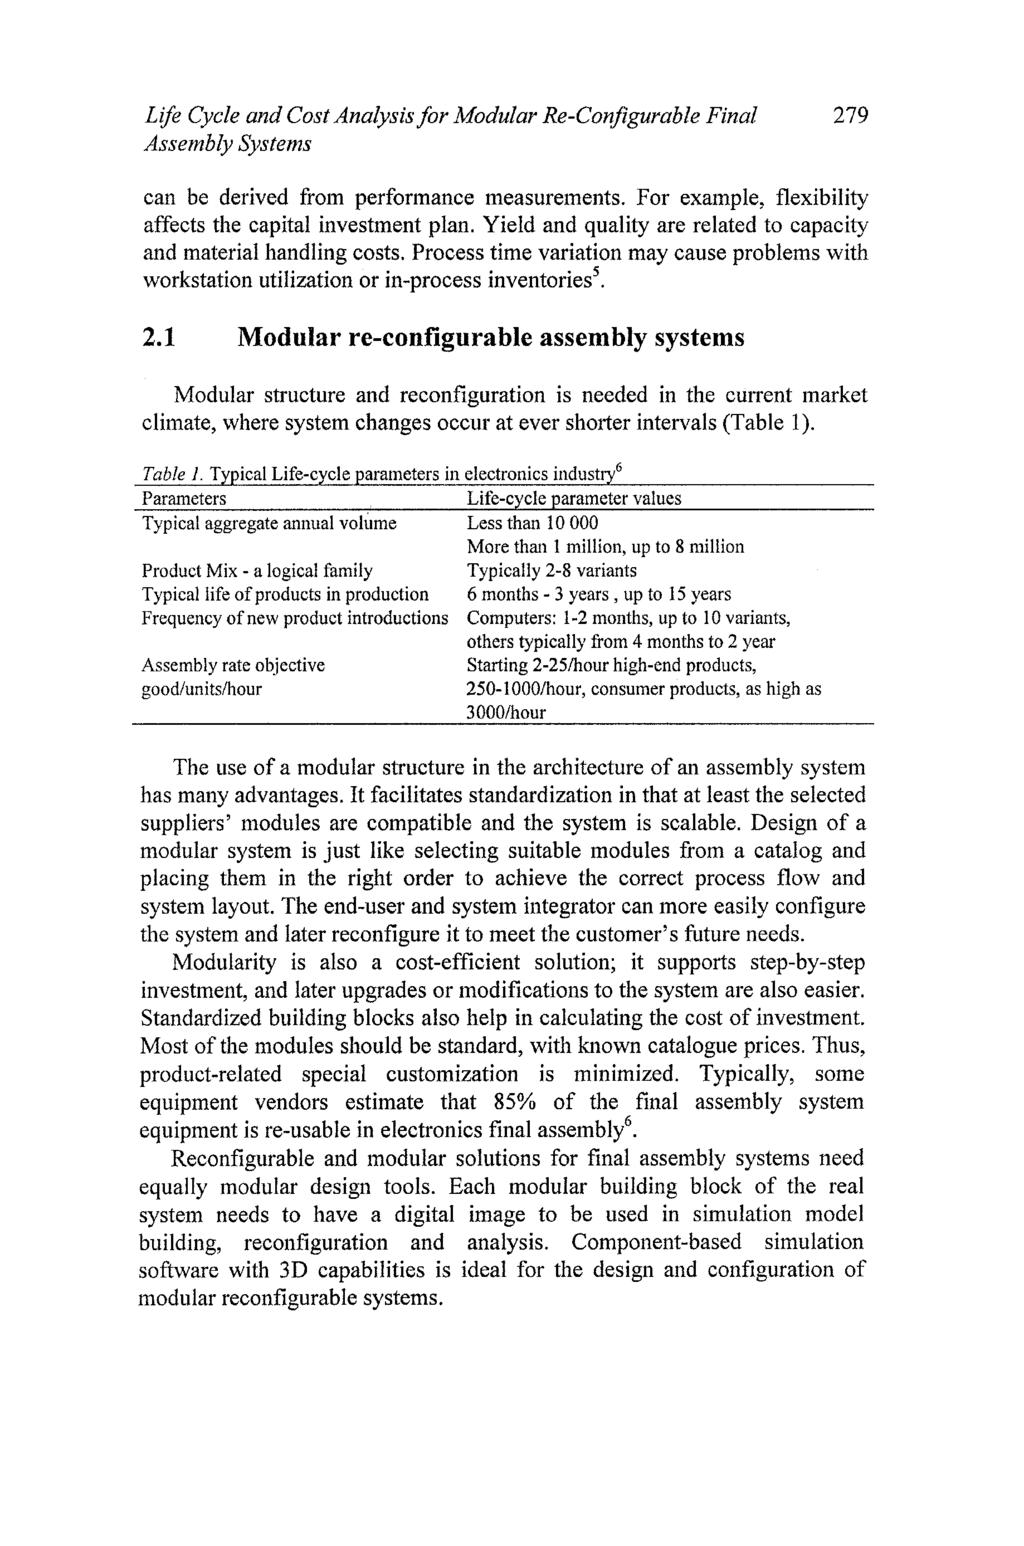 Life Cycle and Cost Analysis for Modular Re-Configuruble Final 279 Assembly Systems can be derived from performance measurements. For example, flexibility affects the capital investment plan.